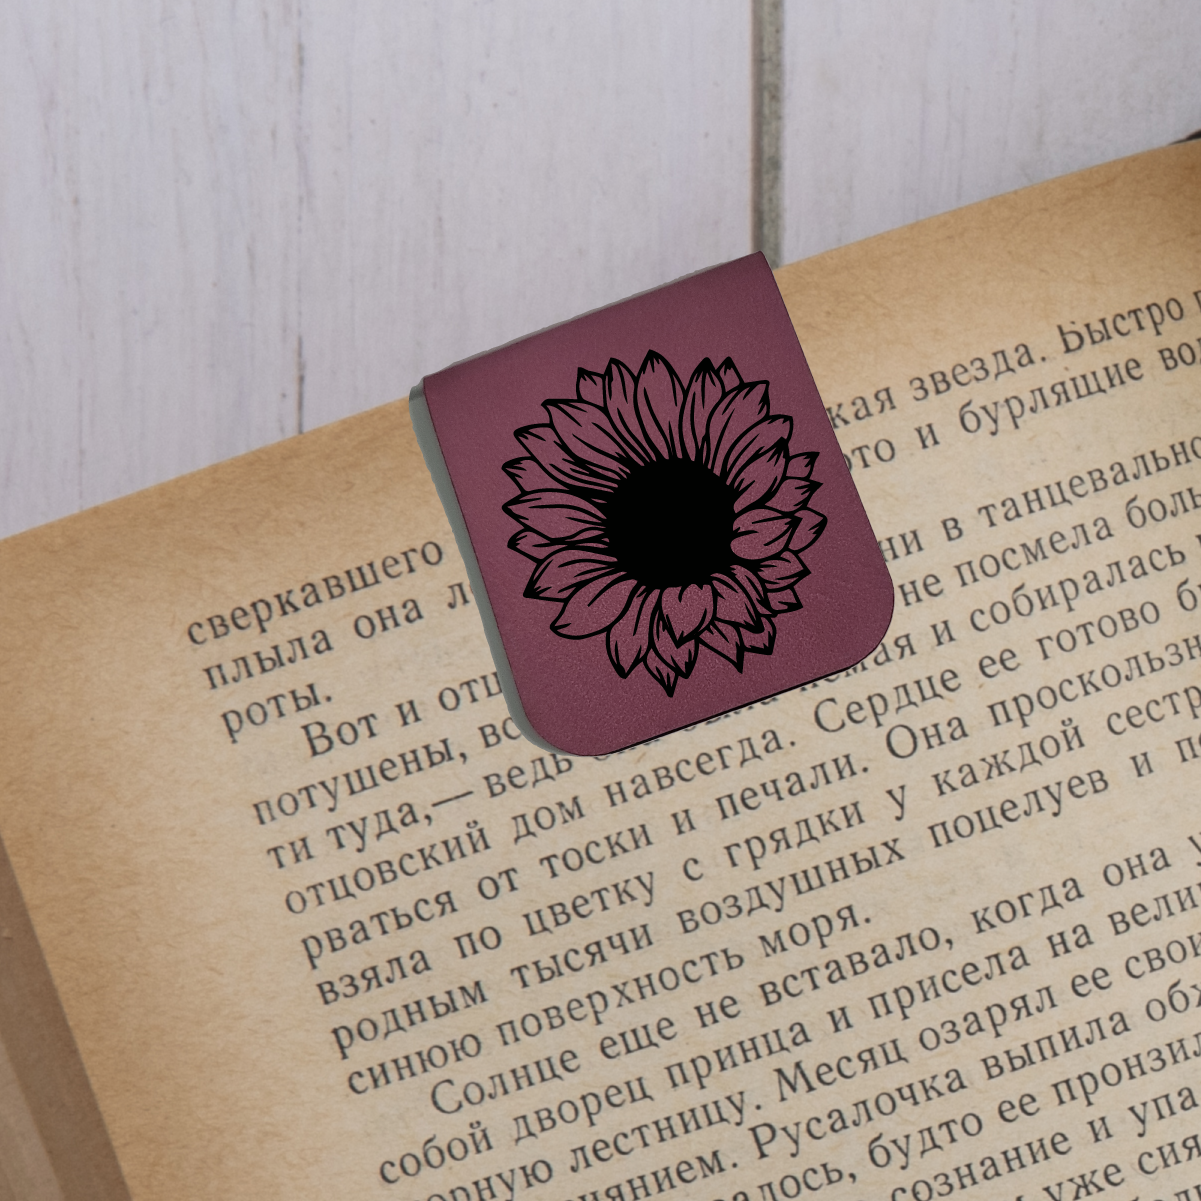 Sunflower - Magnetic Leatherette Bookmark - Choose your leatherette color!